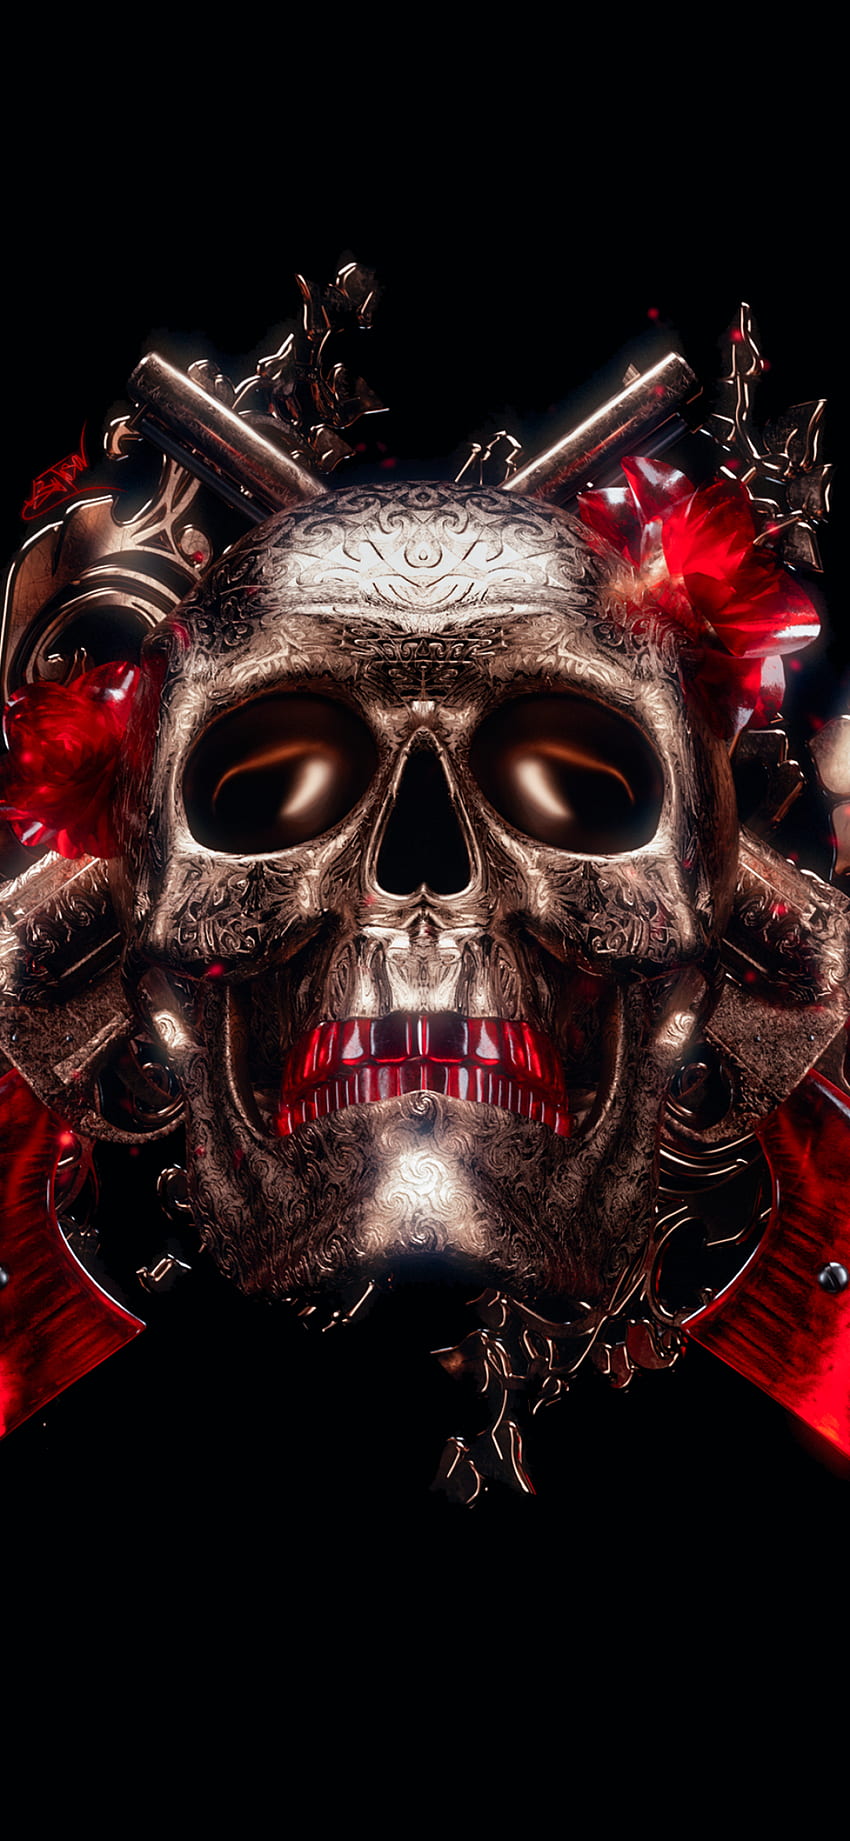 HD wallpaper gray and red skull wallpaper fire lines shadow abstract  illustration  Wallpaper Flare